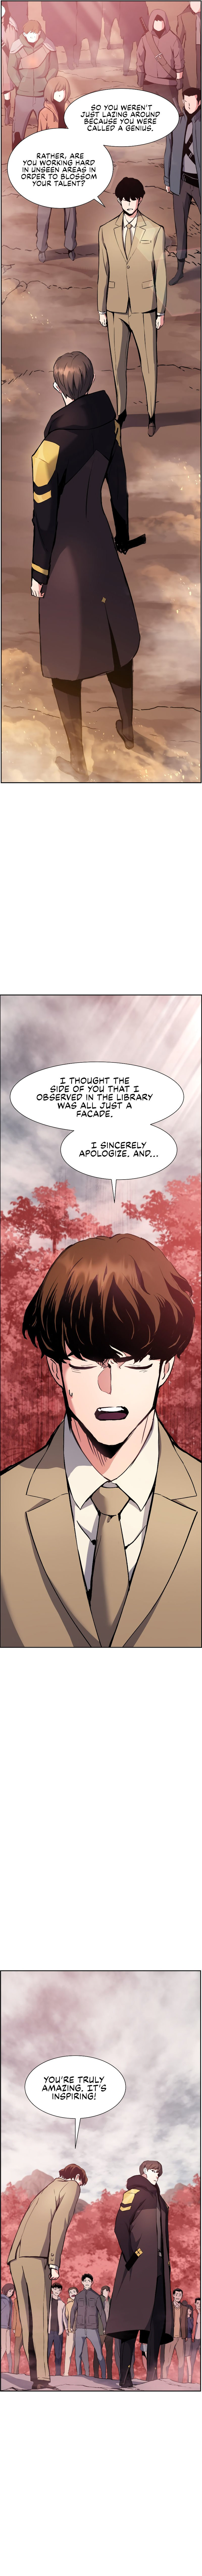 return-of-the-shattered-constellation-chap-33-5